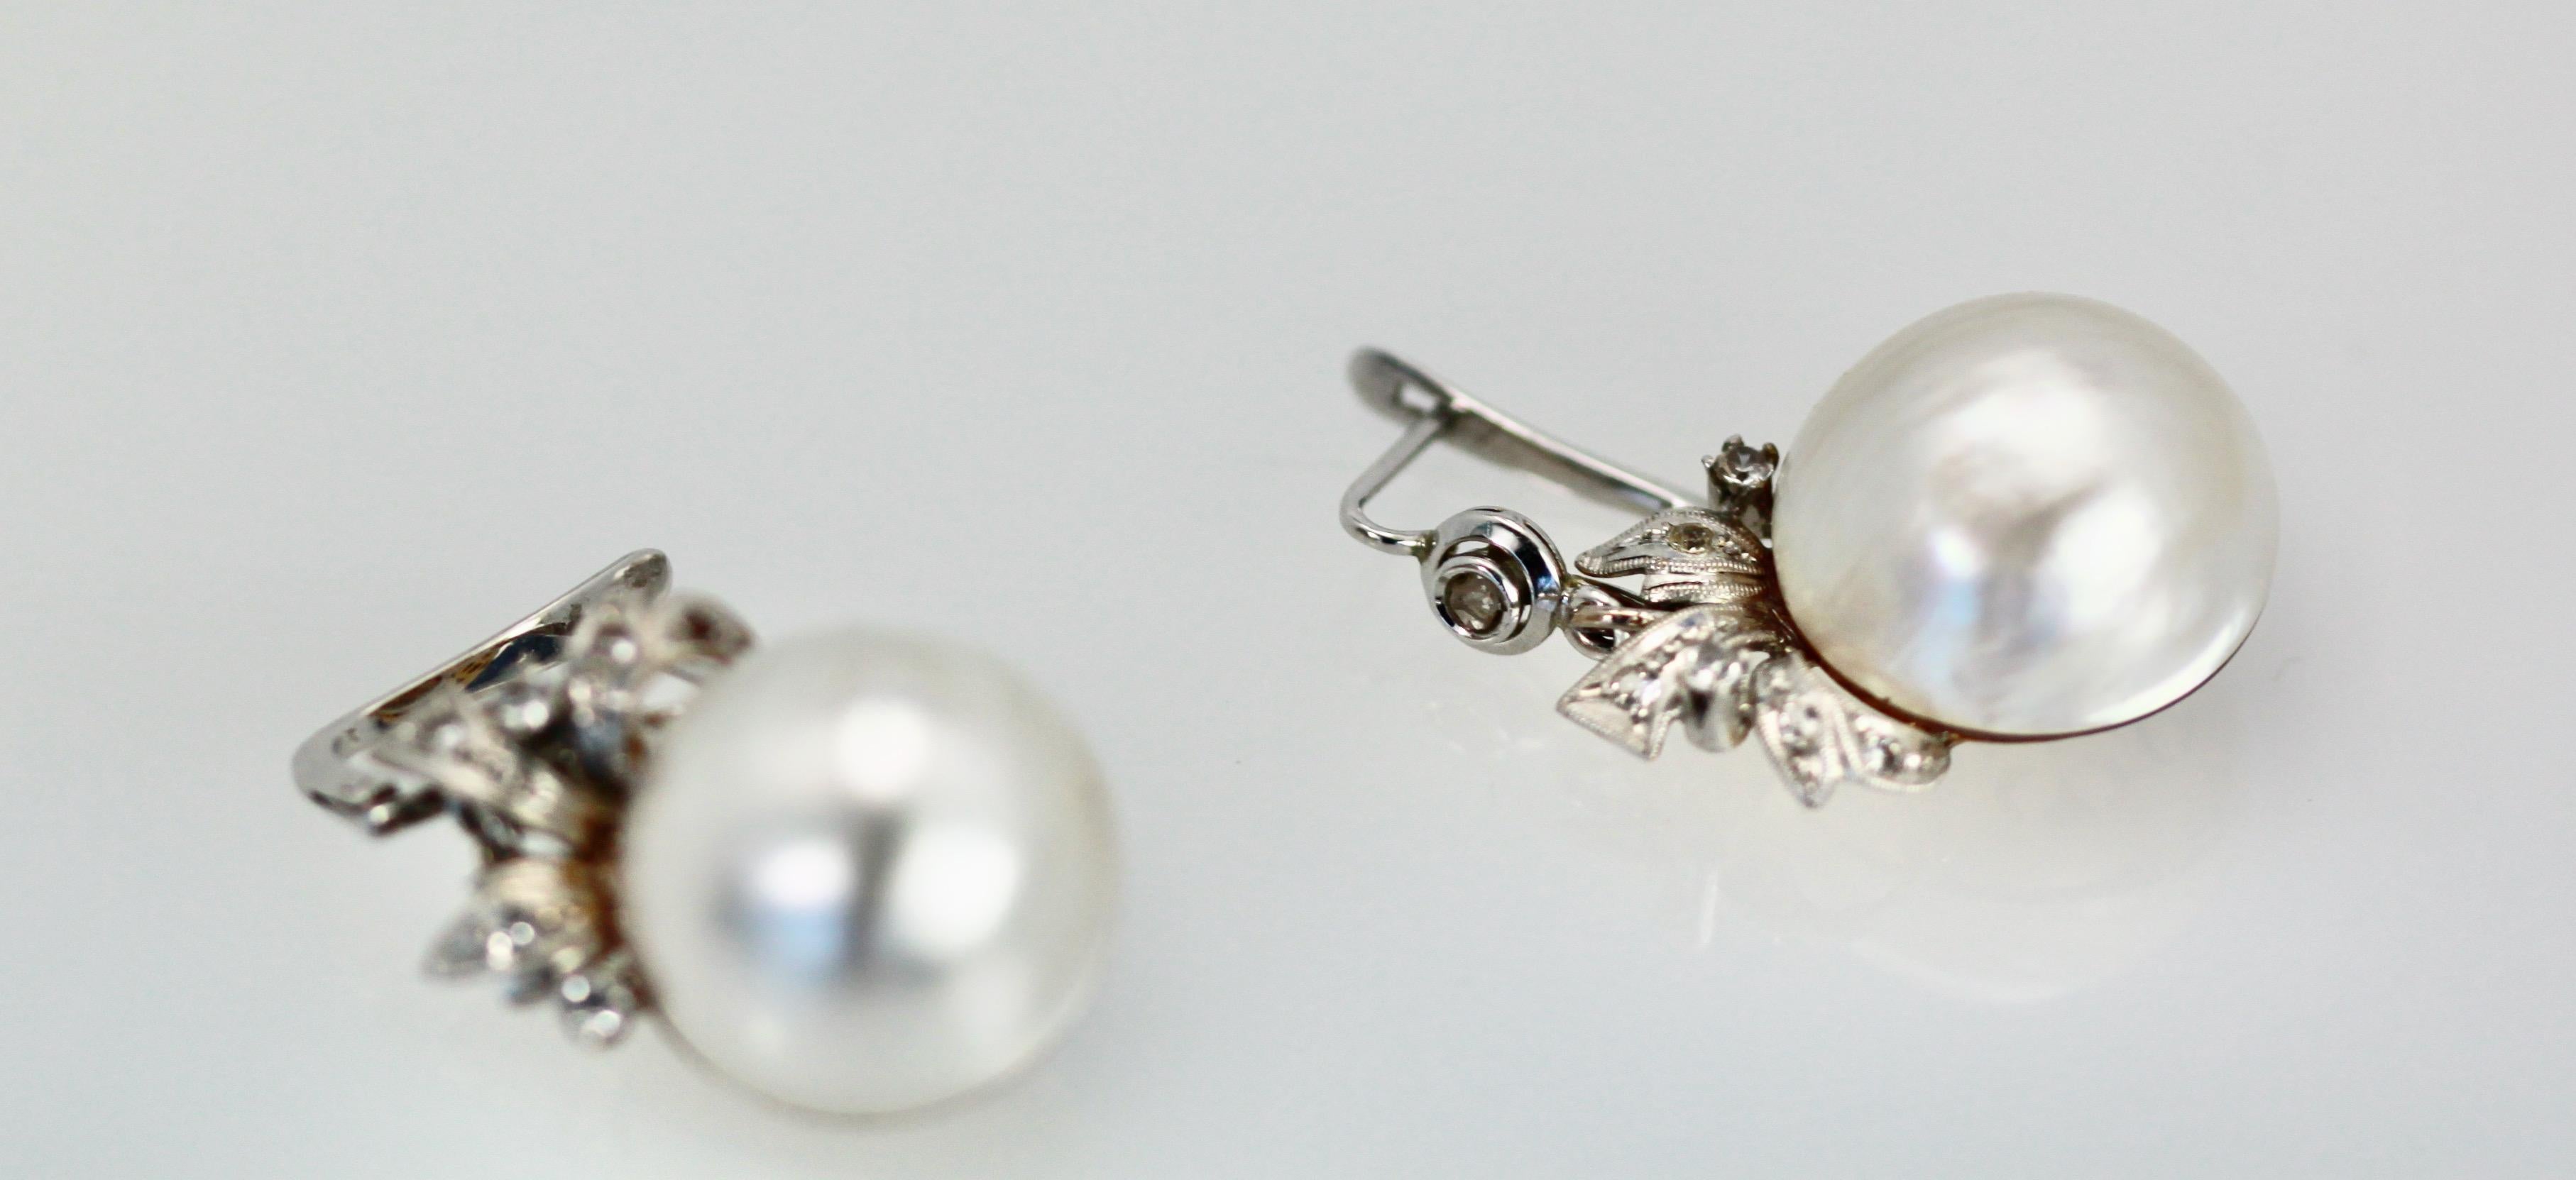 These Edwardian Mabe Pearl earrings have been in my collection for years and it is now time for a new owner.  These Mabe Pearl earrings originated as clips but I do not like clip earrings so I changed them to pierced earrings.  These lovely earrings